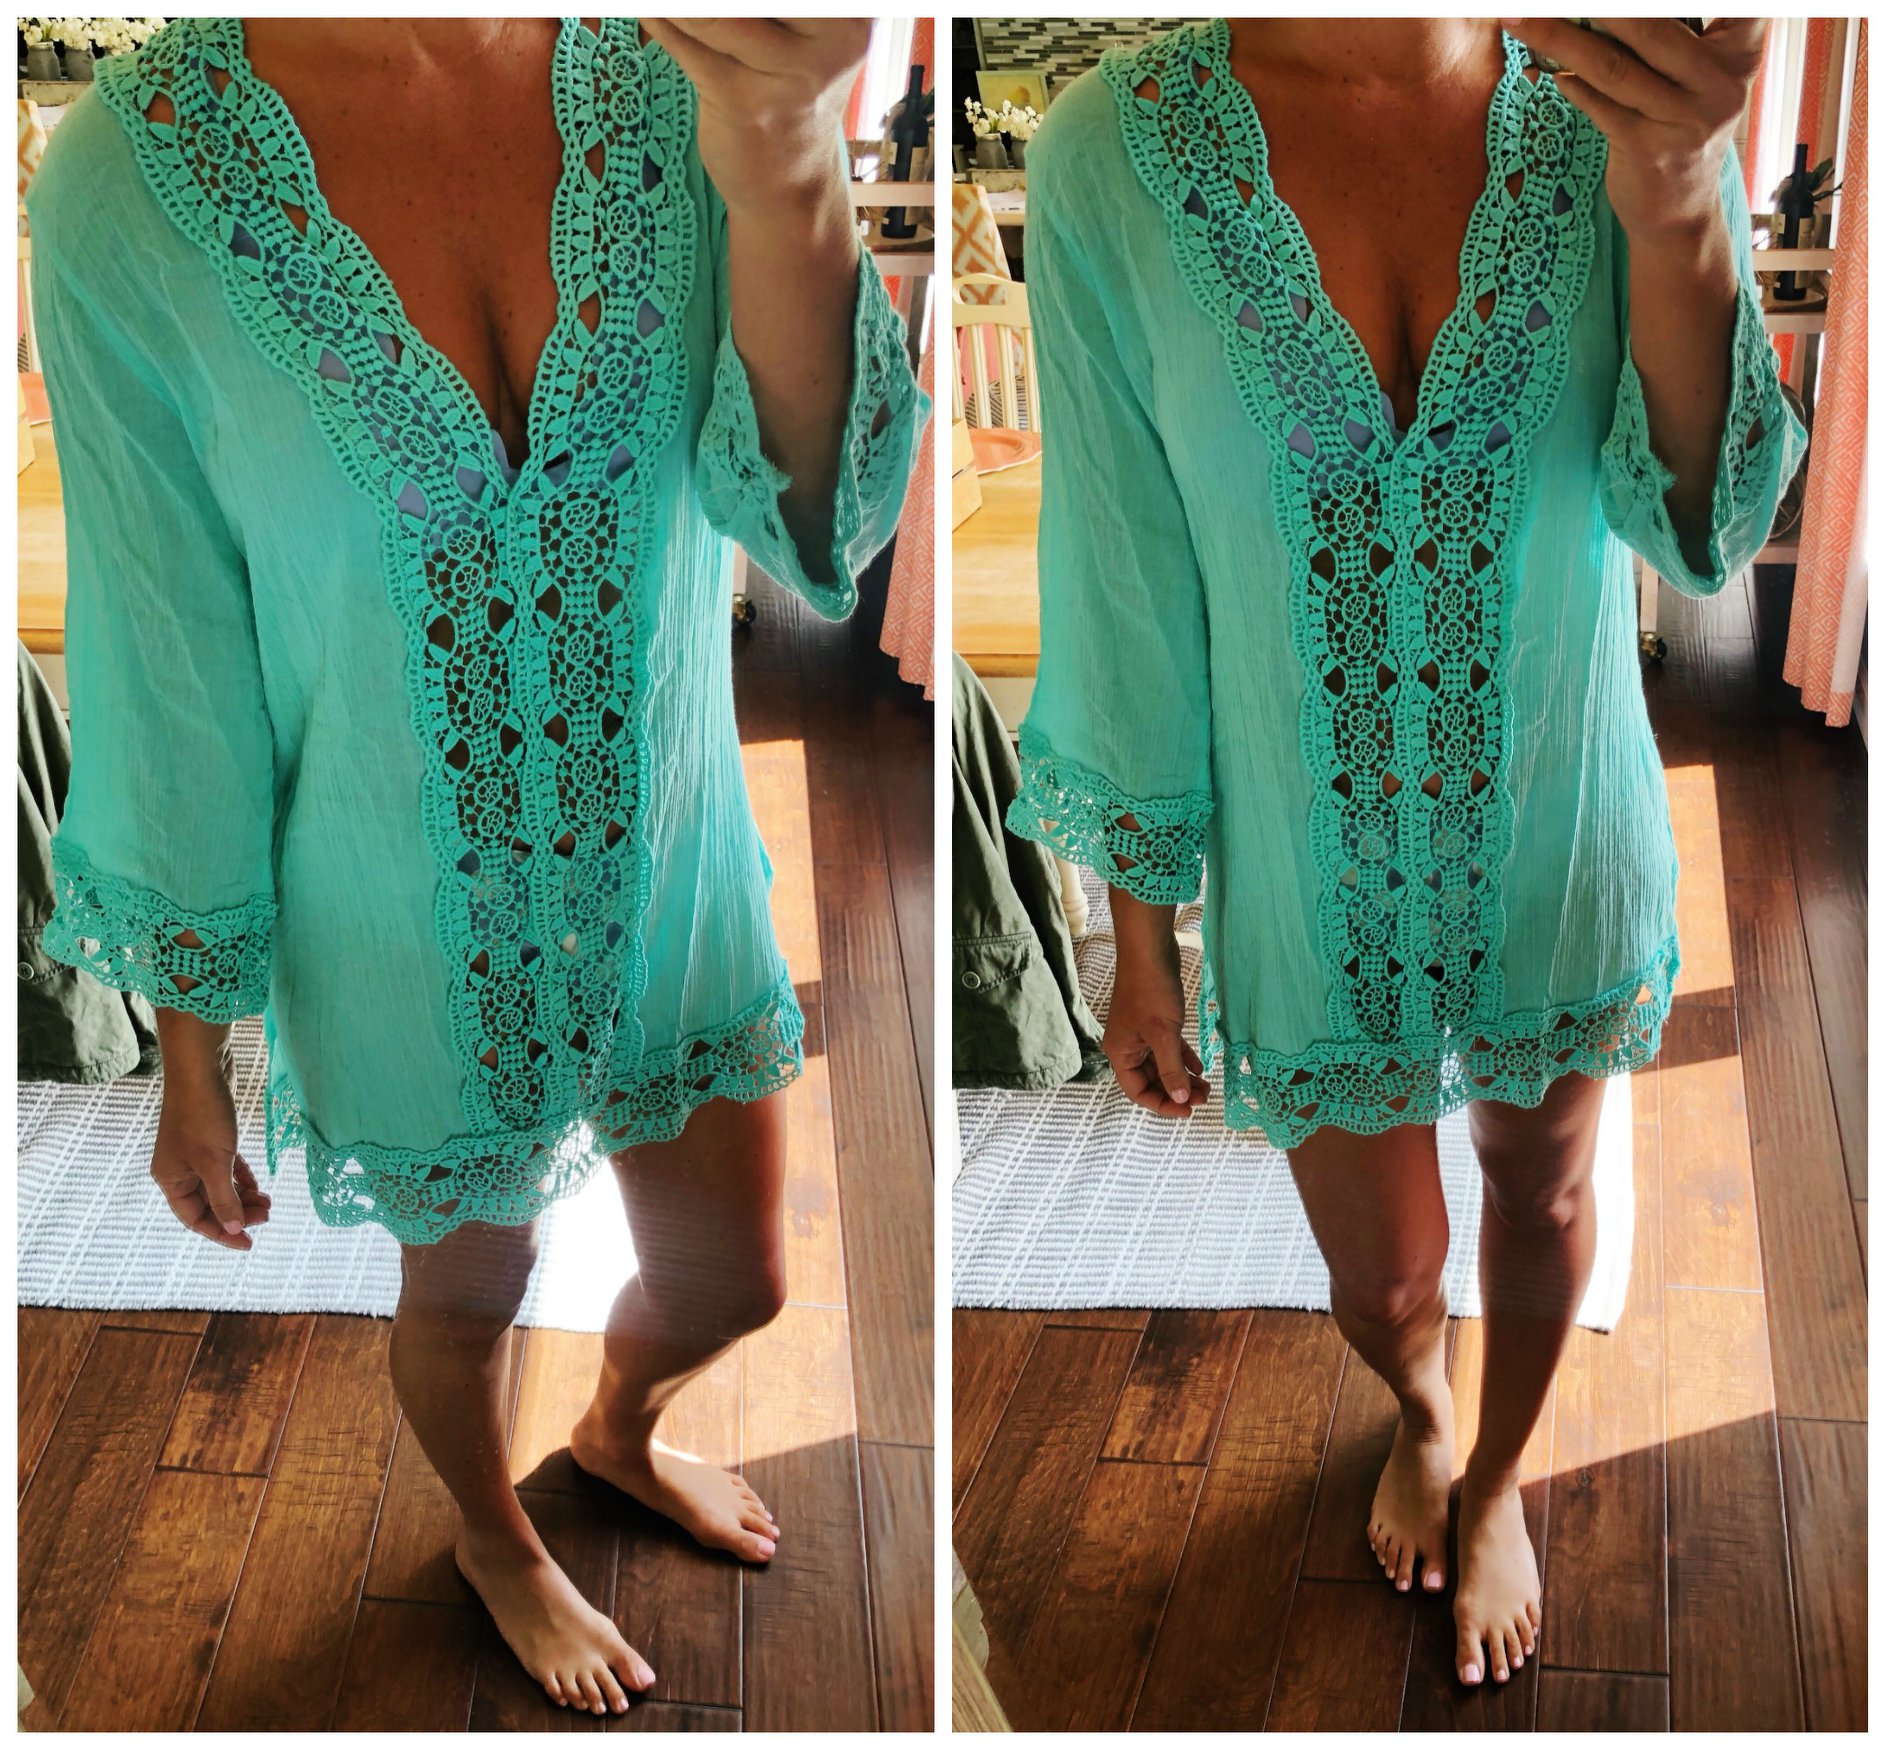 Beach Cover Up // Swim Cover Up // What to wear on the 4th of July // Beach Outfit // Cute Cover Up